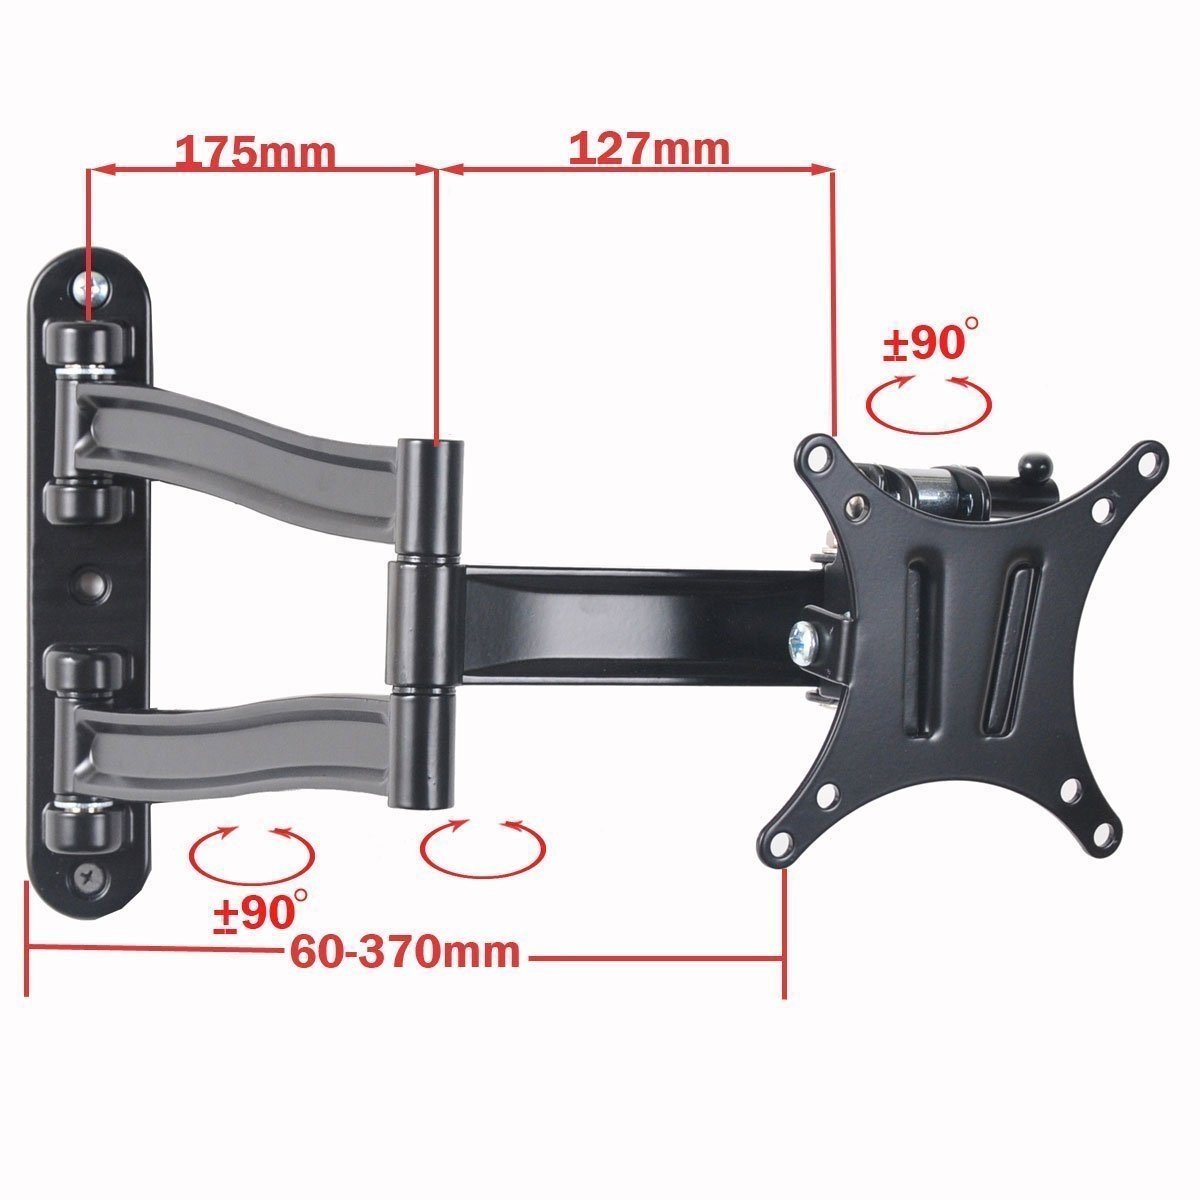 VideoSecu Articulating TV Monitor Wall Mount for 15"-29" Tilt Swivel LCD LED Full Motion Flat Panel Screen Bracket with mounting hole patterns 100x100/75x75mm, Removable Plate CYK - image 3 of 3